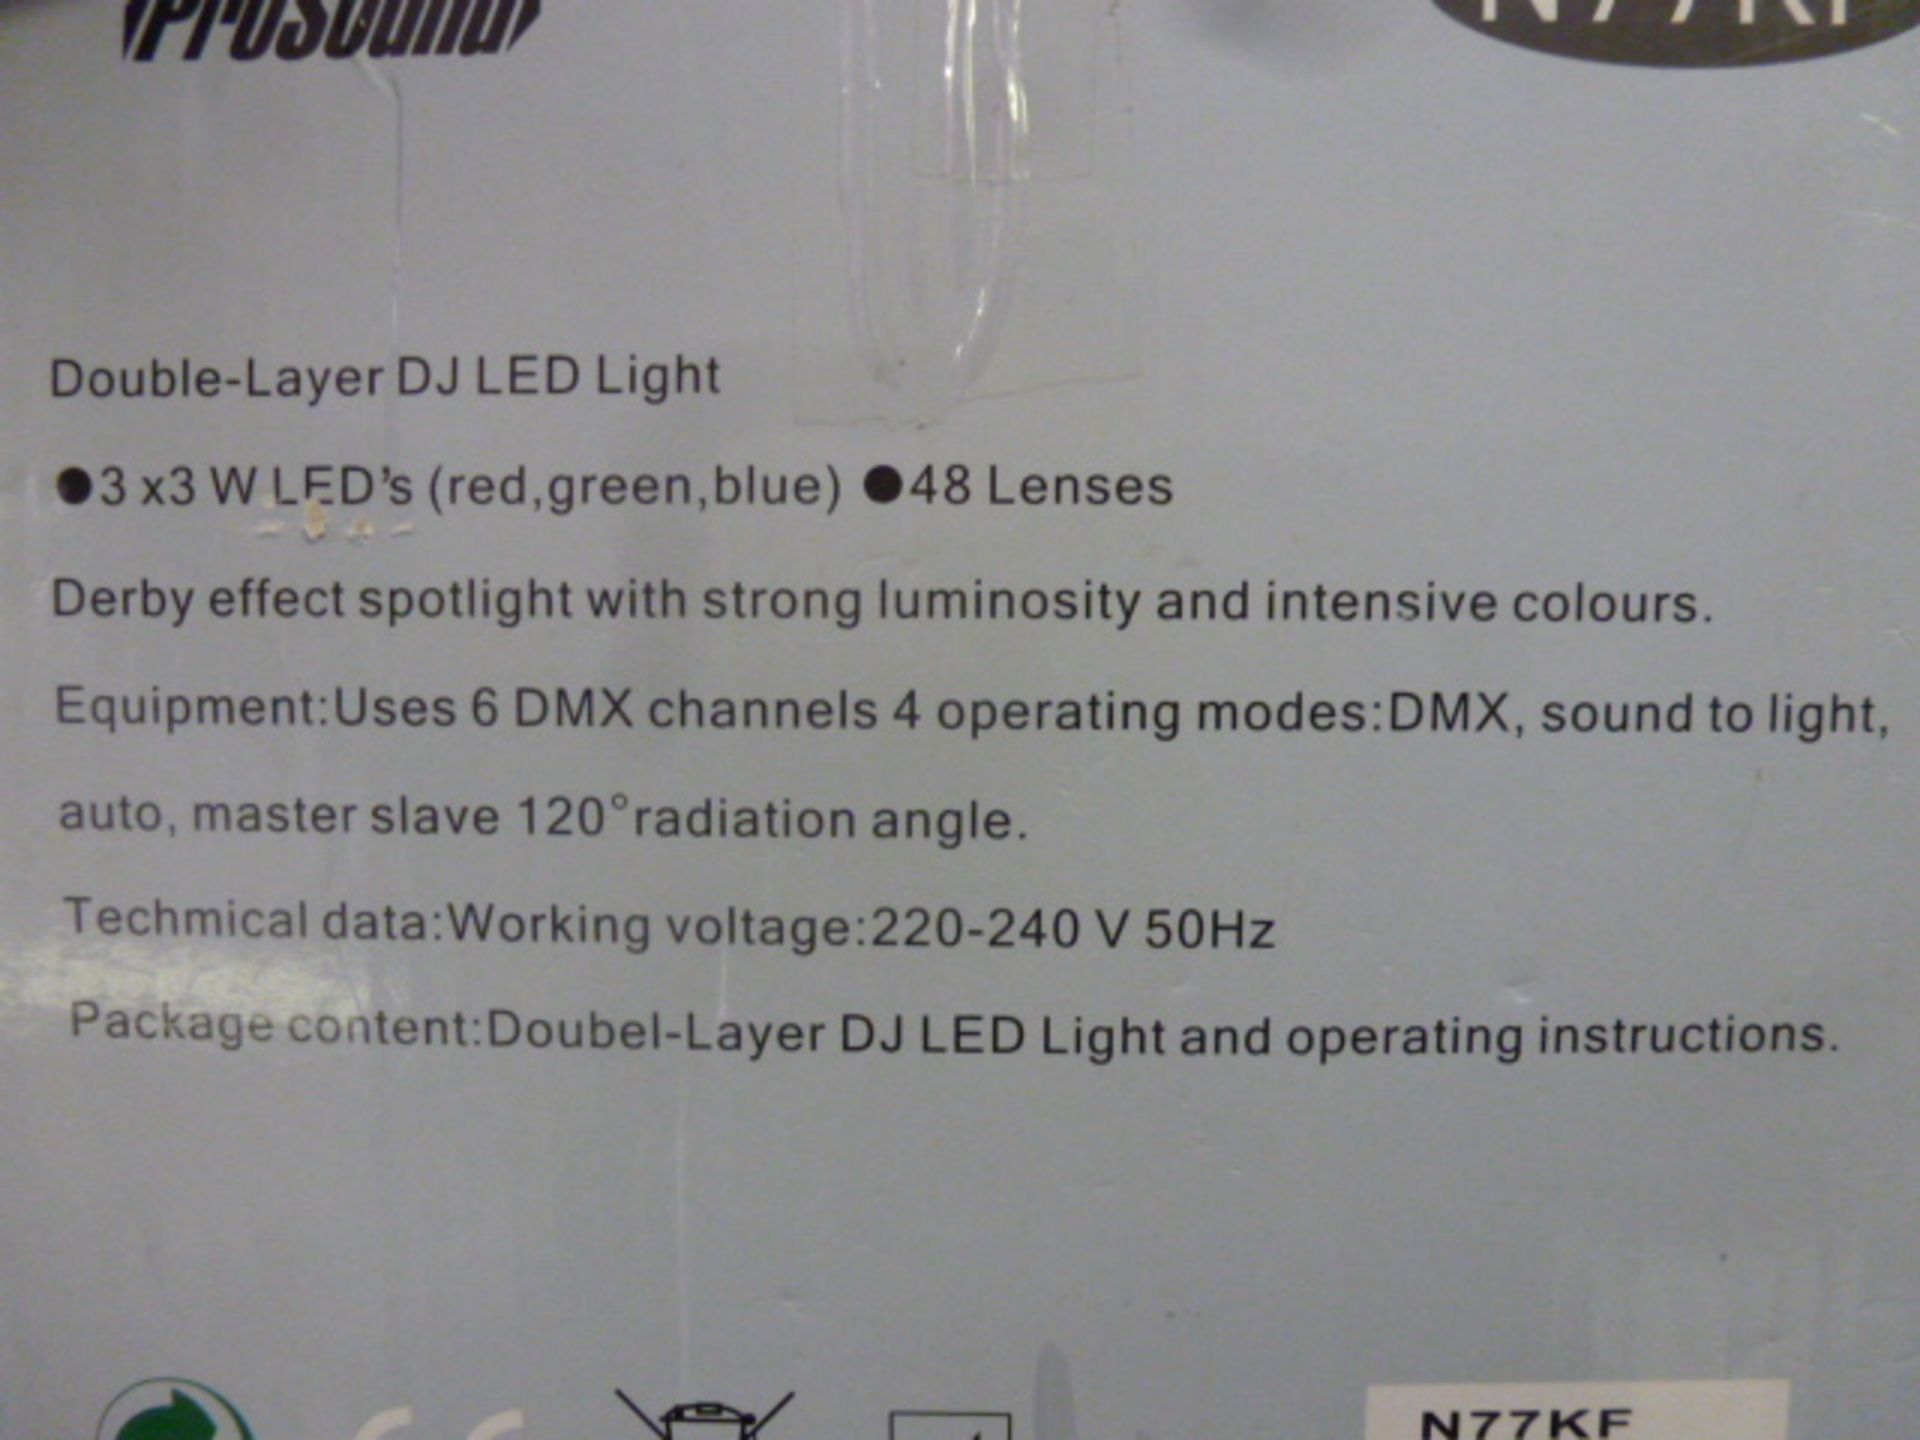 ProSound Double Layer DJ LED Light with DMX, Model N77KF, In Original Box. - Image 4 of 4